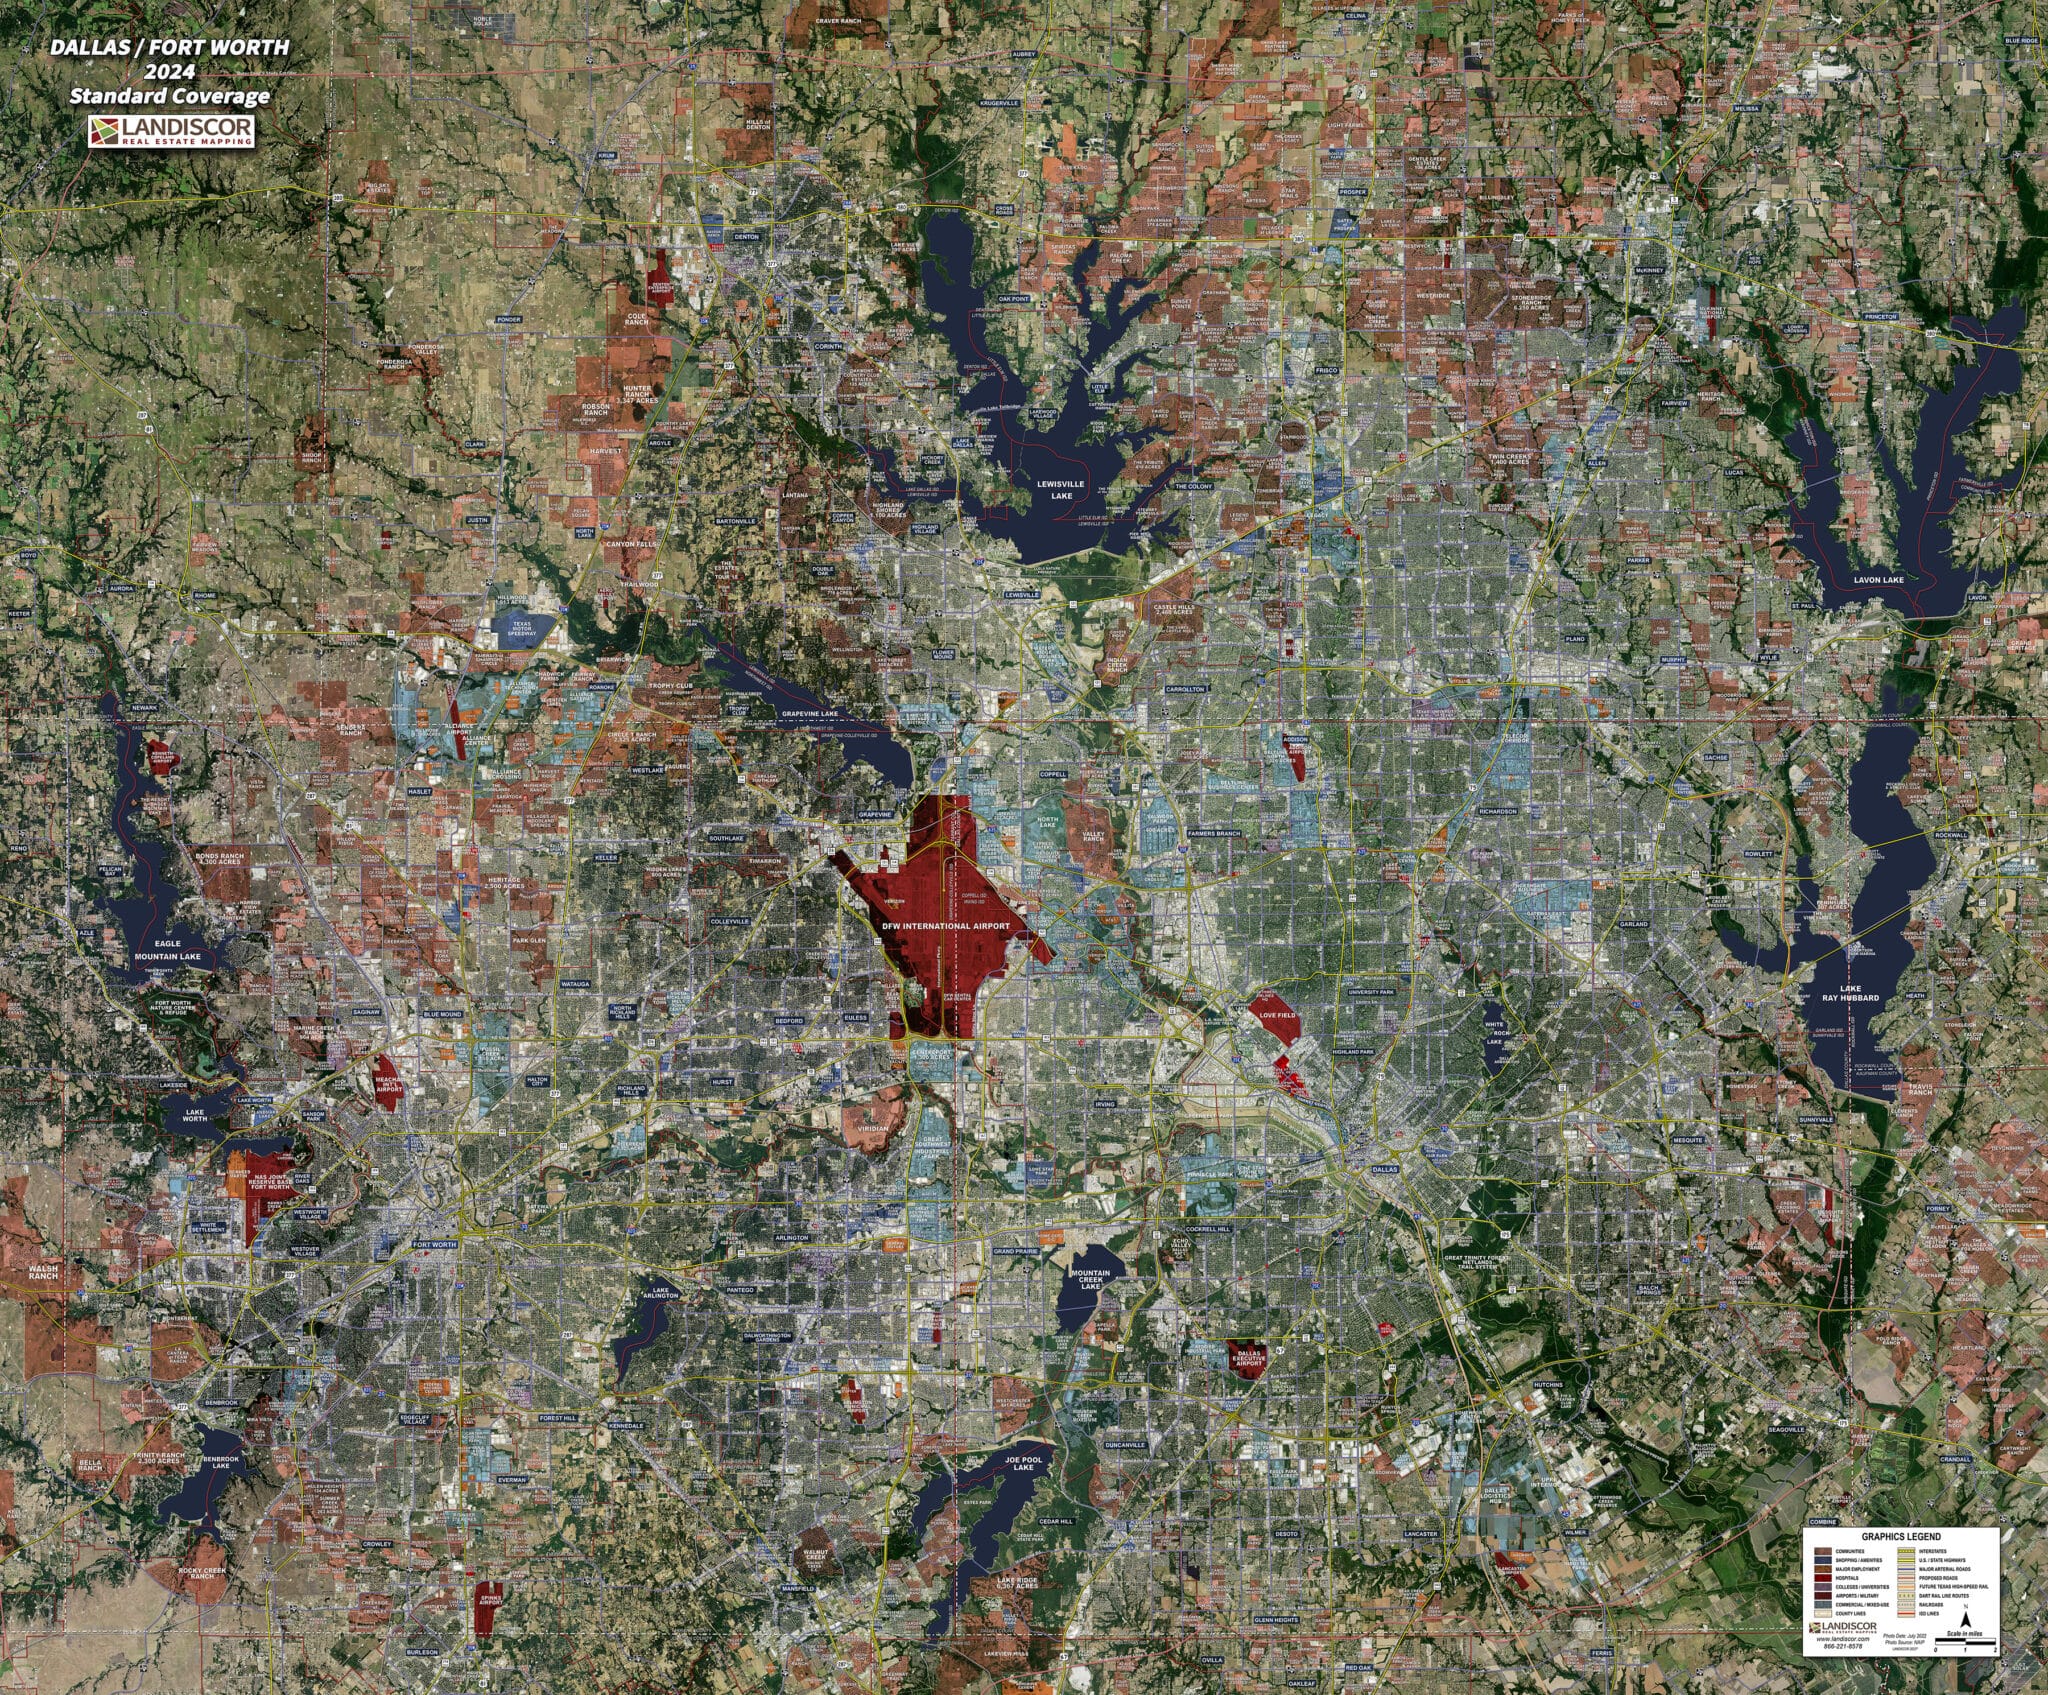 Rolled Aerial Map - Dallas/Fort Worth Standard